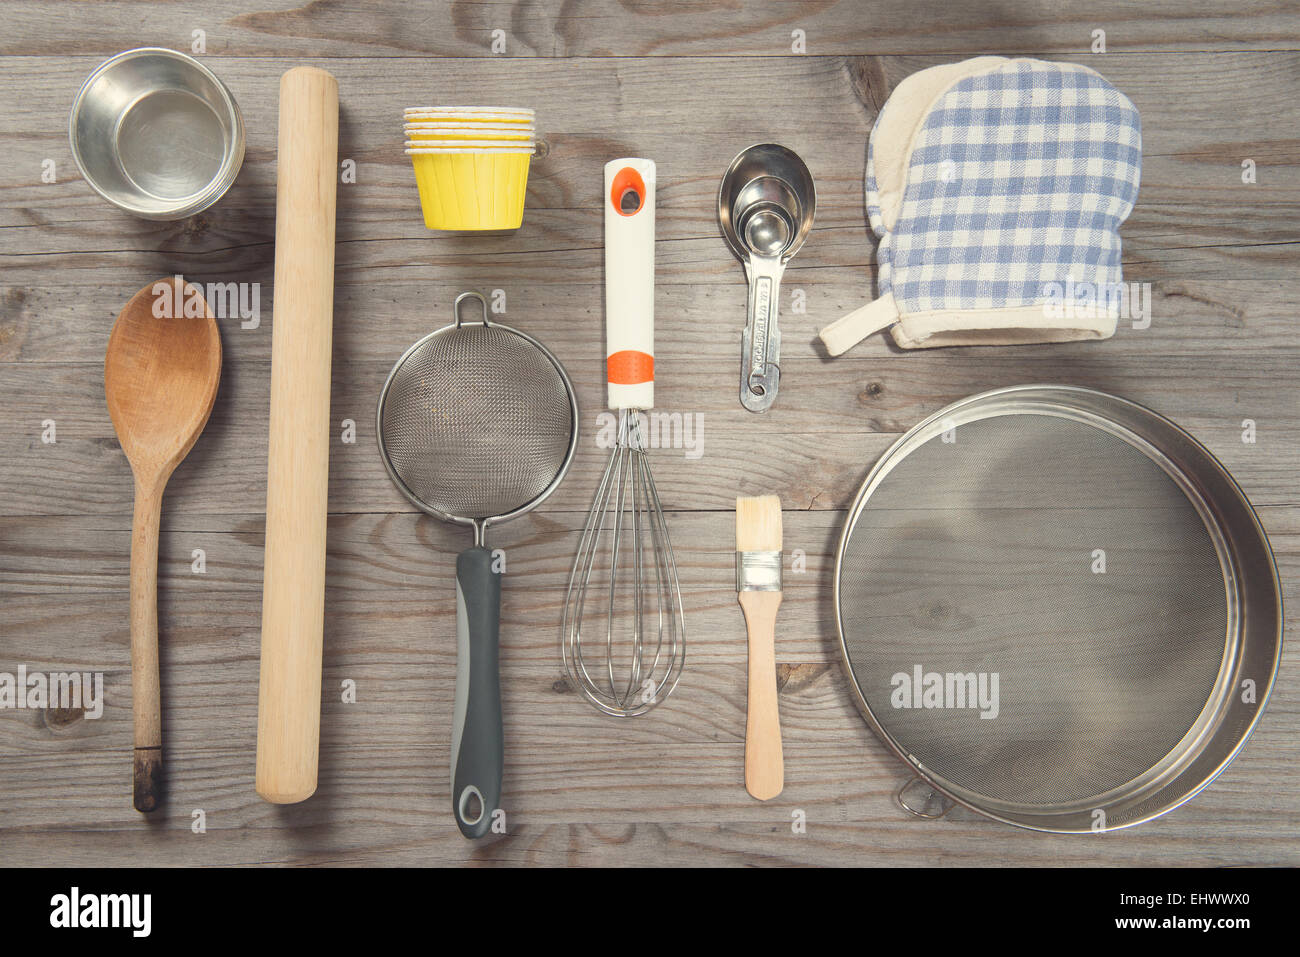 https://c8.alamy.com/comp/EHWWX0/various-baking-tools-arrange-from-overhead-view-on-wooden-table-in-EHWWX0.jpg